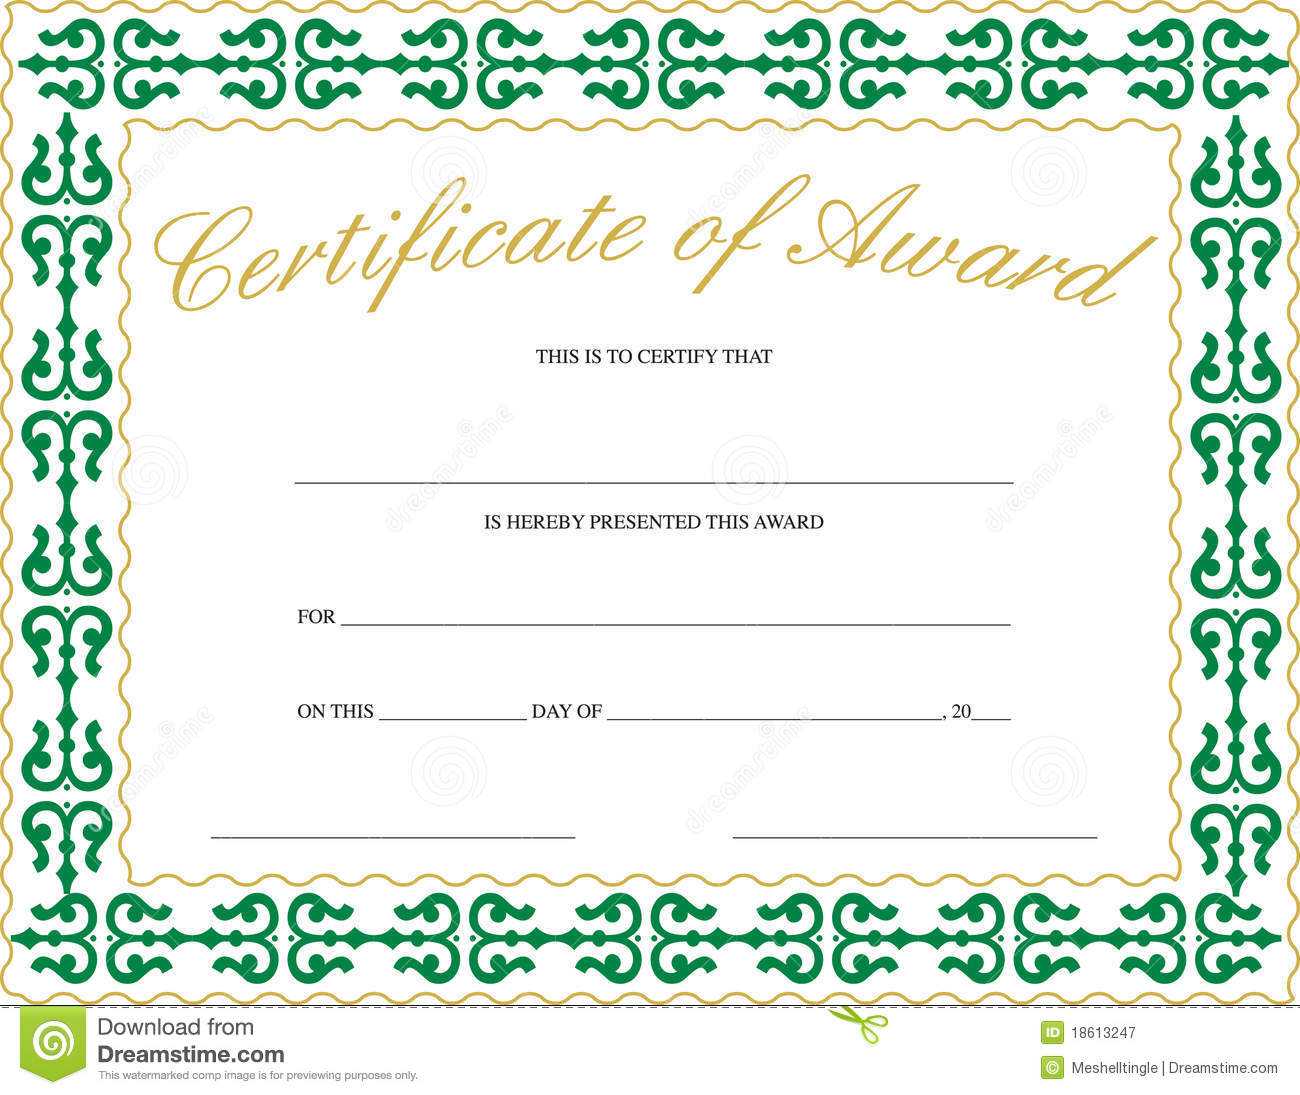 Certificate Of Award Stock Vector. Illustration Of Paper With Referral Certificate Template